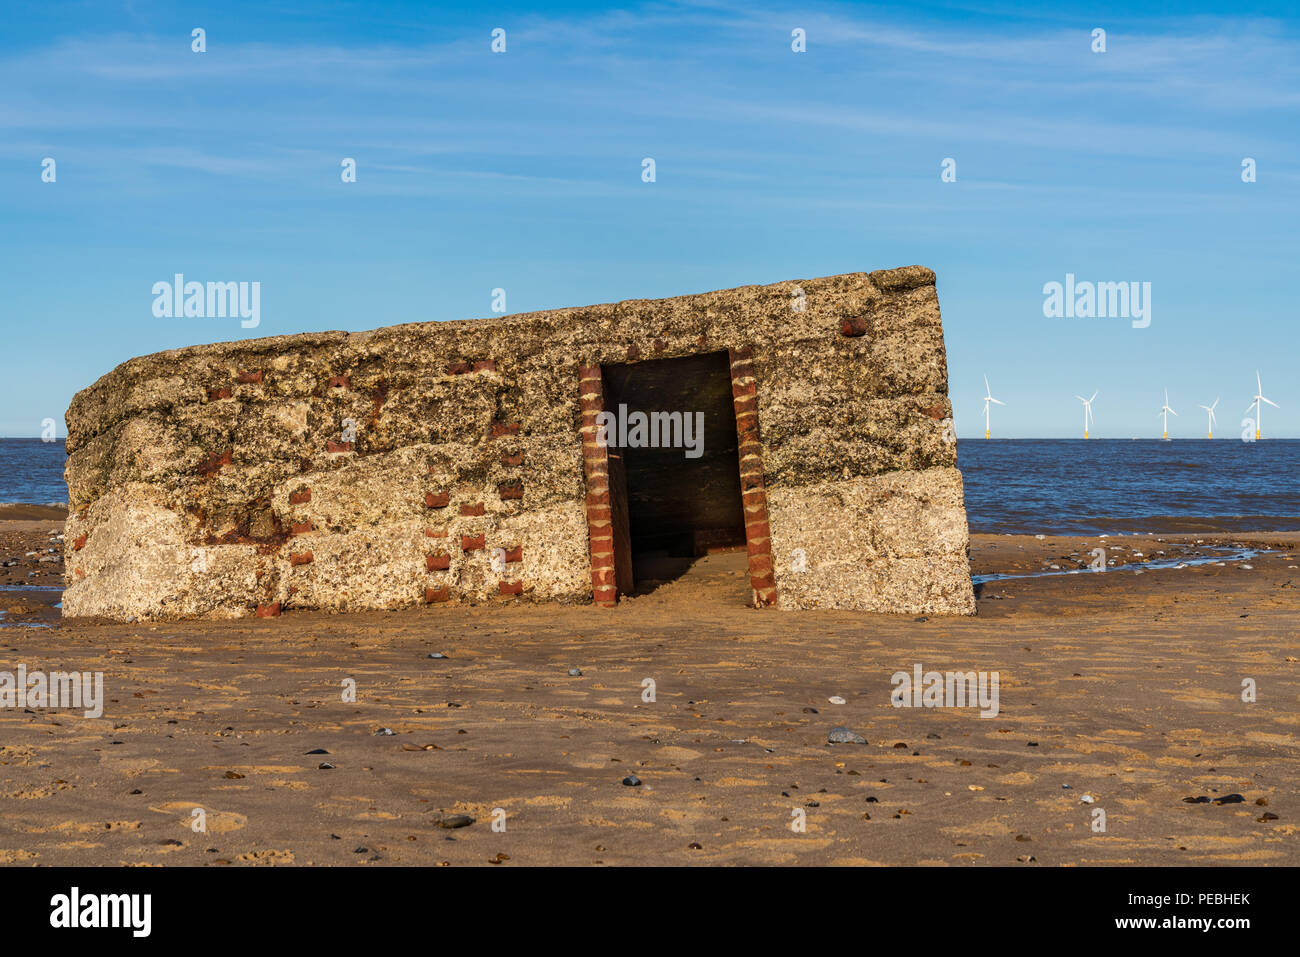 North sea coast in Caister-on-Sea, Norfolk, England, UK -  with an old bunker on the beach and wind turbines in the background Stock Photo